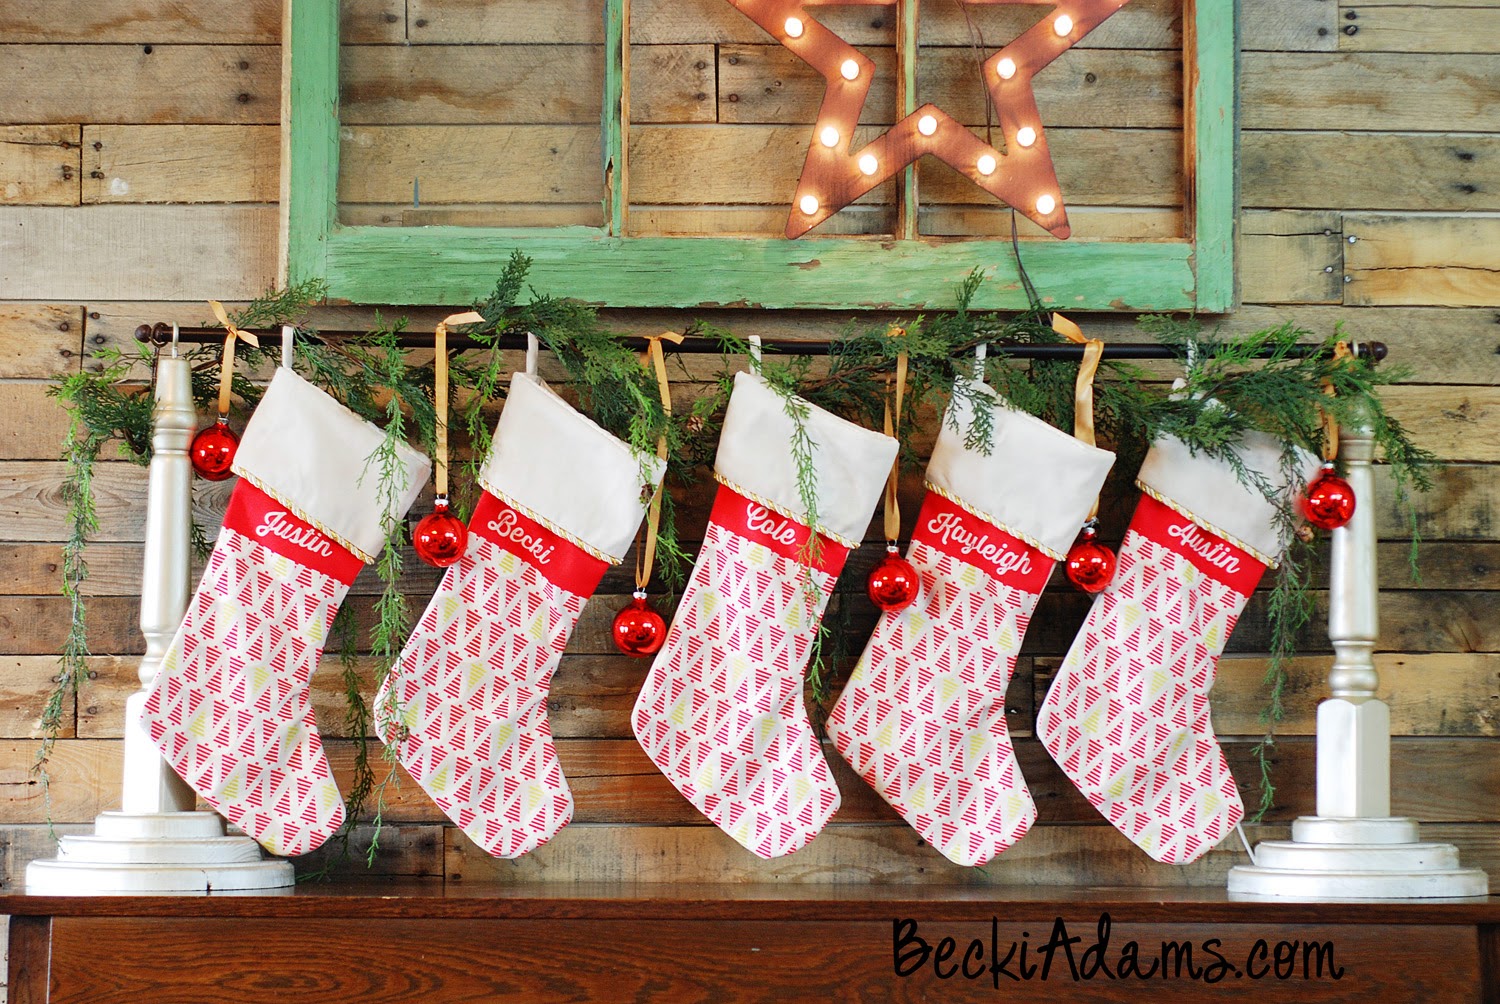 DIY Stocking Holder by @jbckadams with a tutorial #DIYstockingholder #stockings #Christmasstockings #stockinghanger